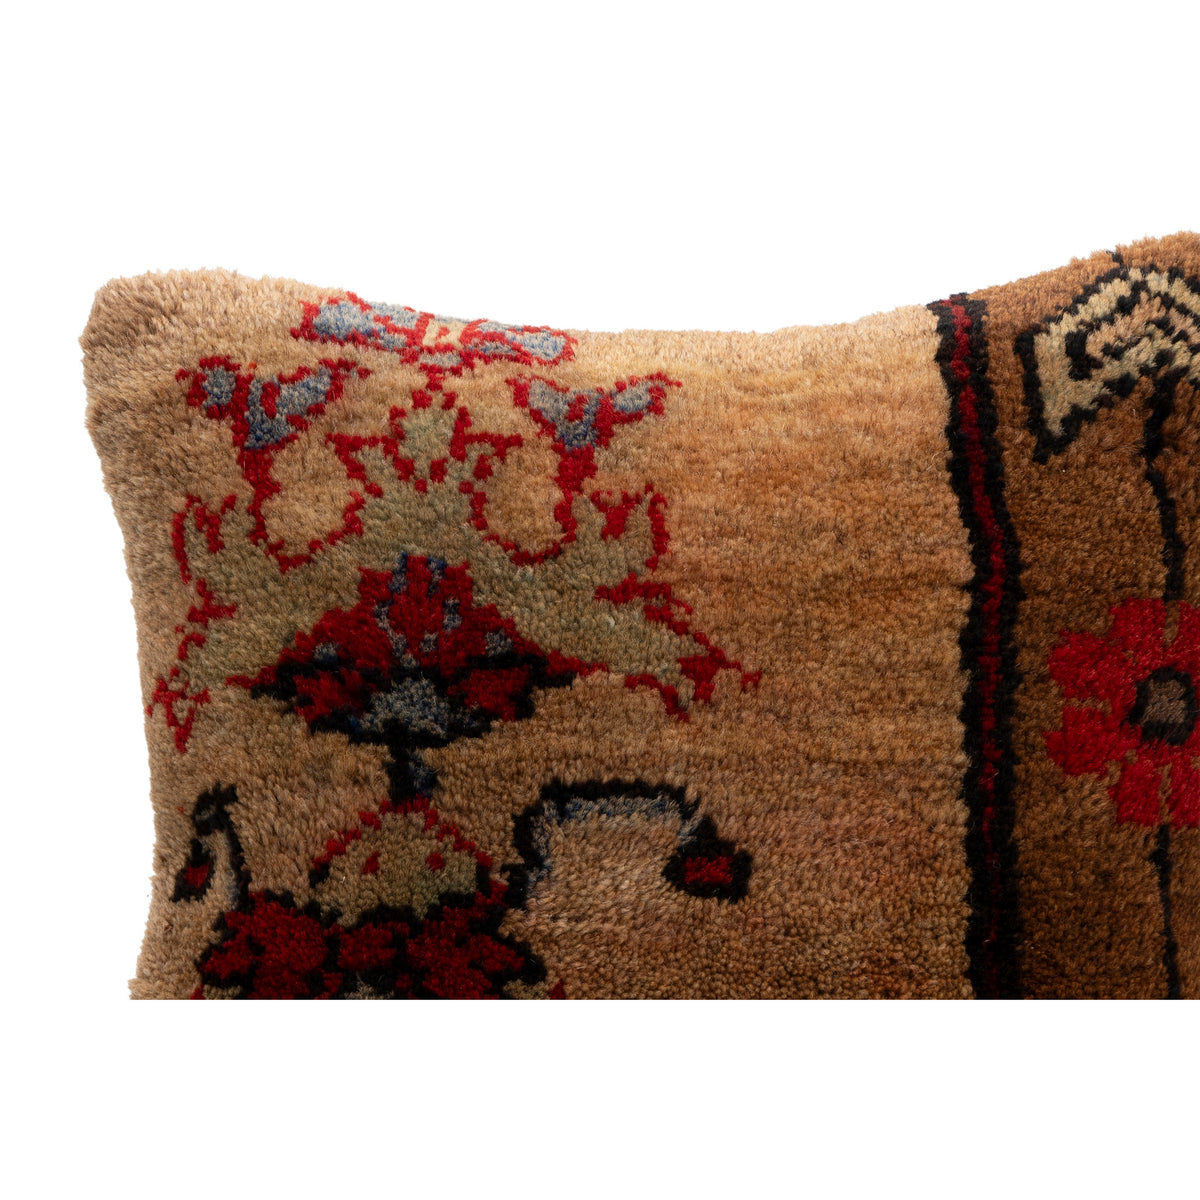 Handwoven Vintage Rug Pillow Cover 16" x 16"